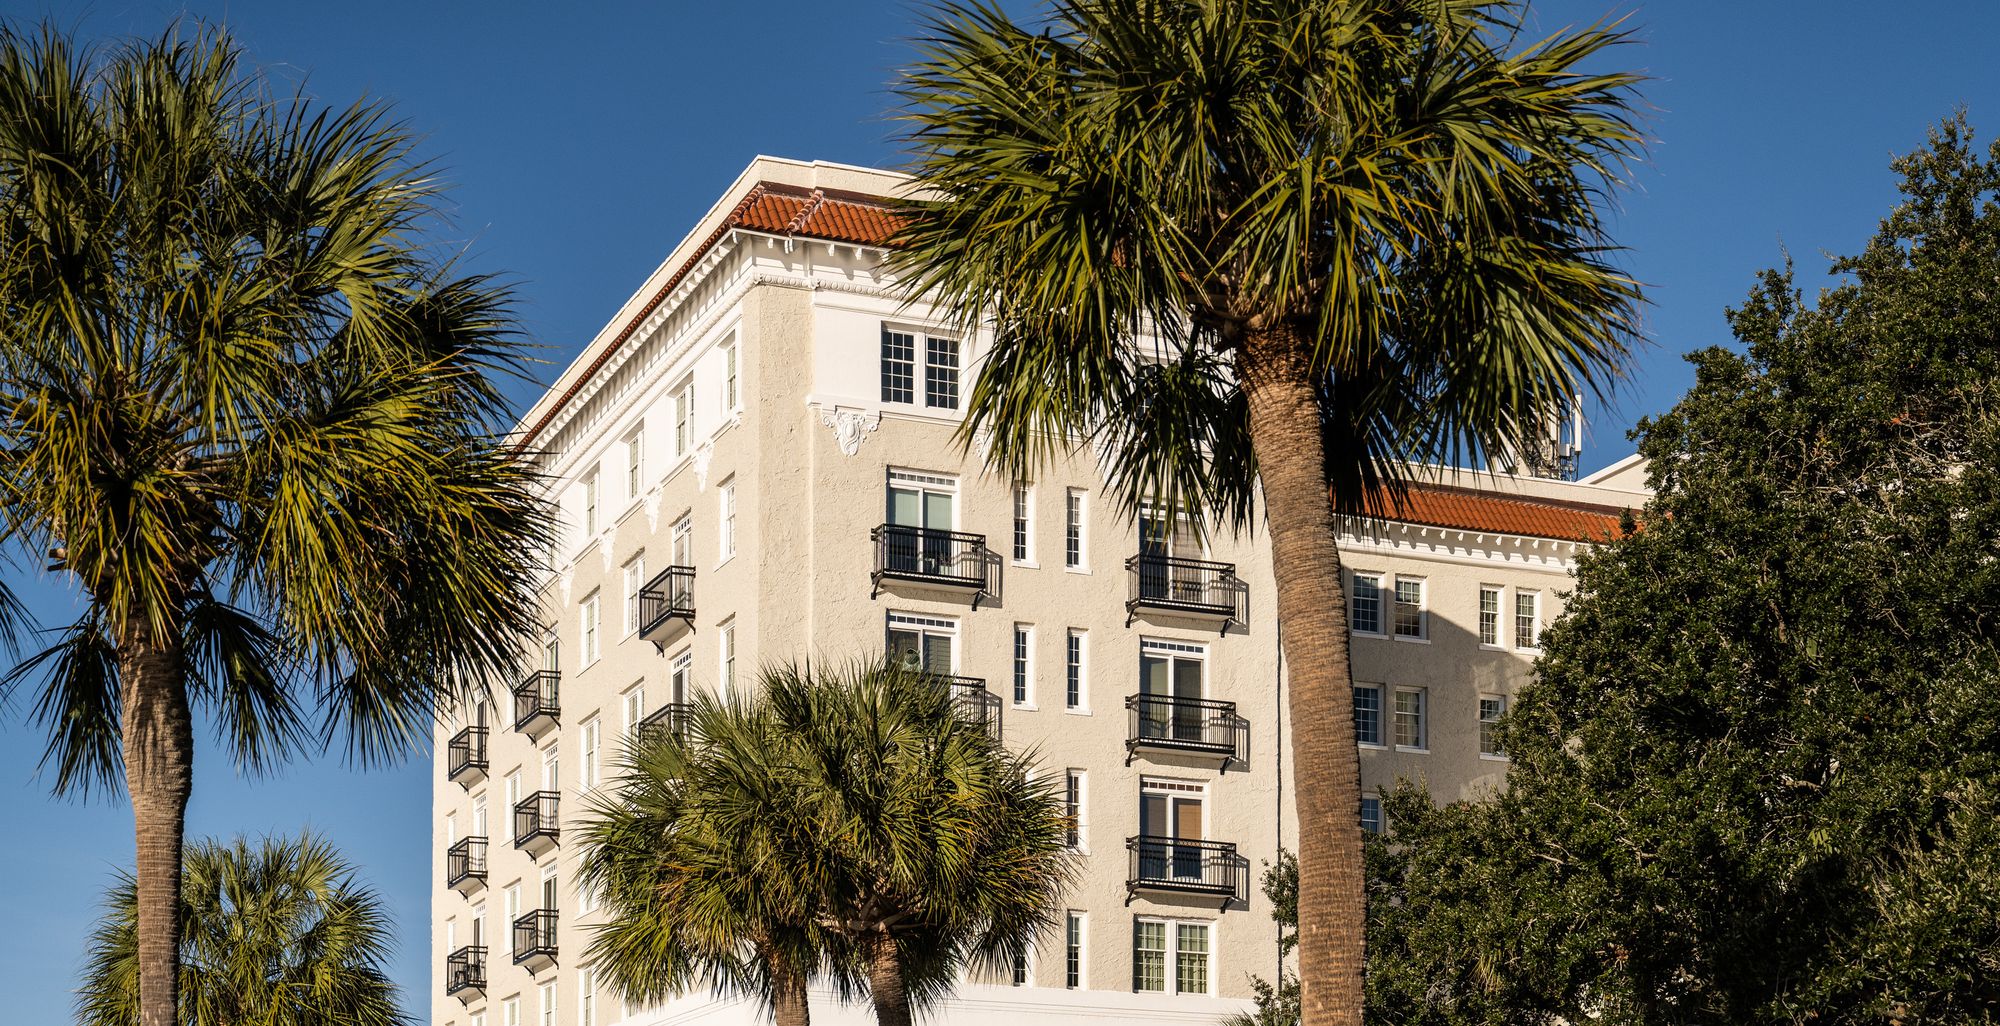 The Charleston Place - Historic Property Under New Management 